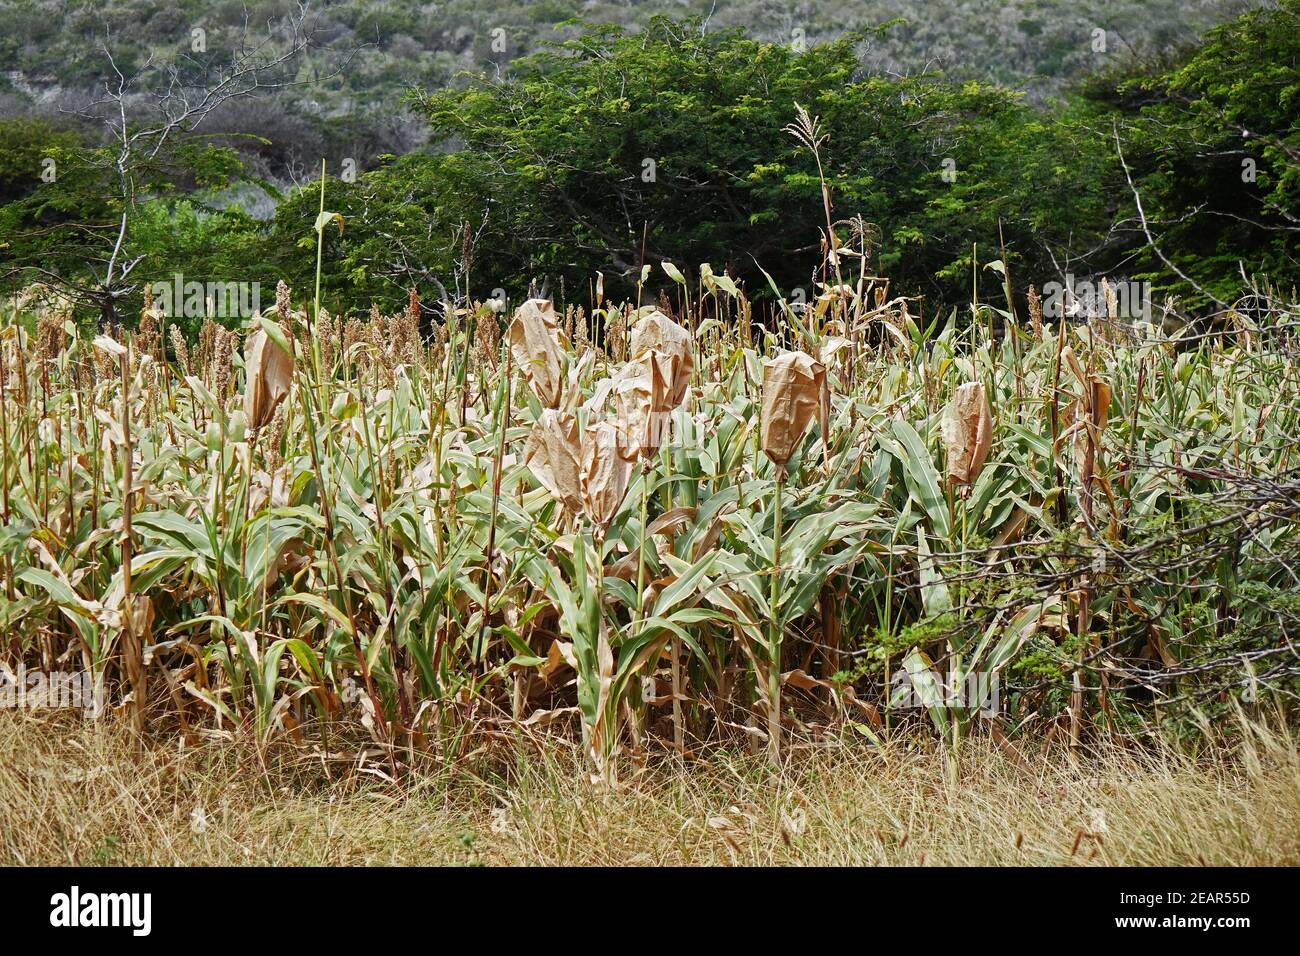 Cultivation of millet in the tropical climate of Bonaire, Caribbean Sea Stock Photo